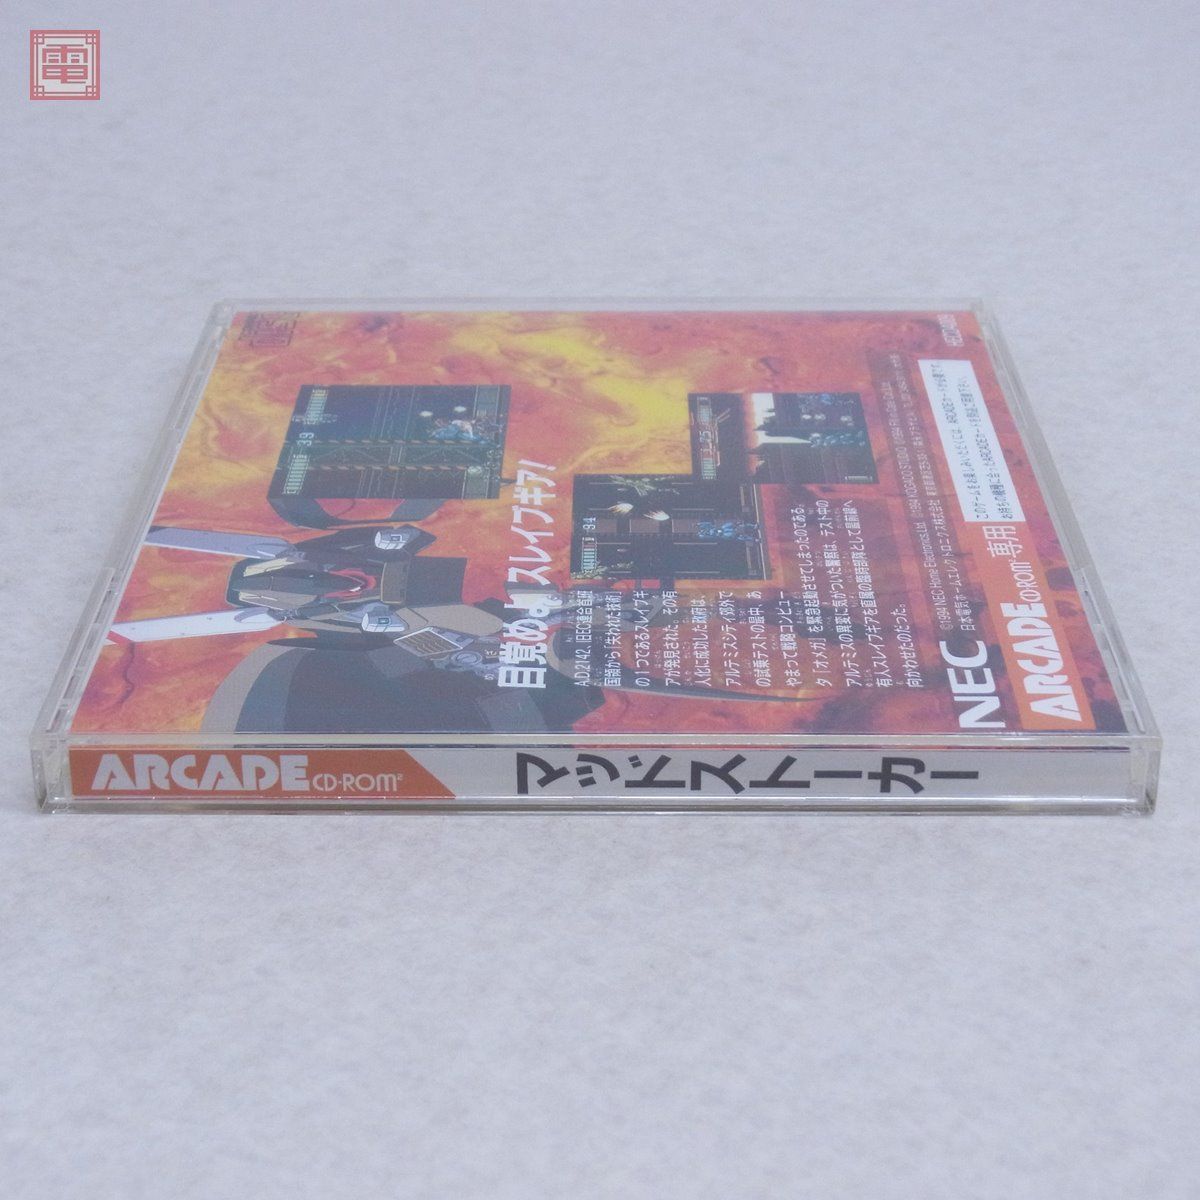 PCE PCエンジン ARCADE CD-ROM2 FULL METAL FORCE マッドストーカー MAD STALKER NEC 工画堂 KOGADO Fill in Cafe 箱説帯付【10の画像7